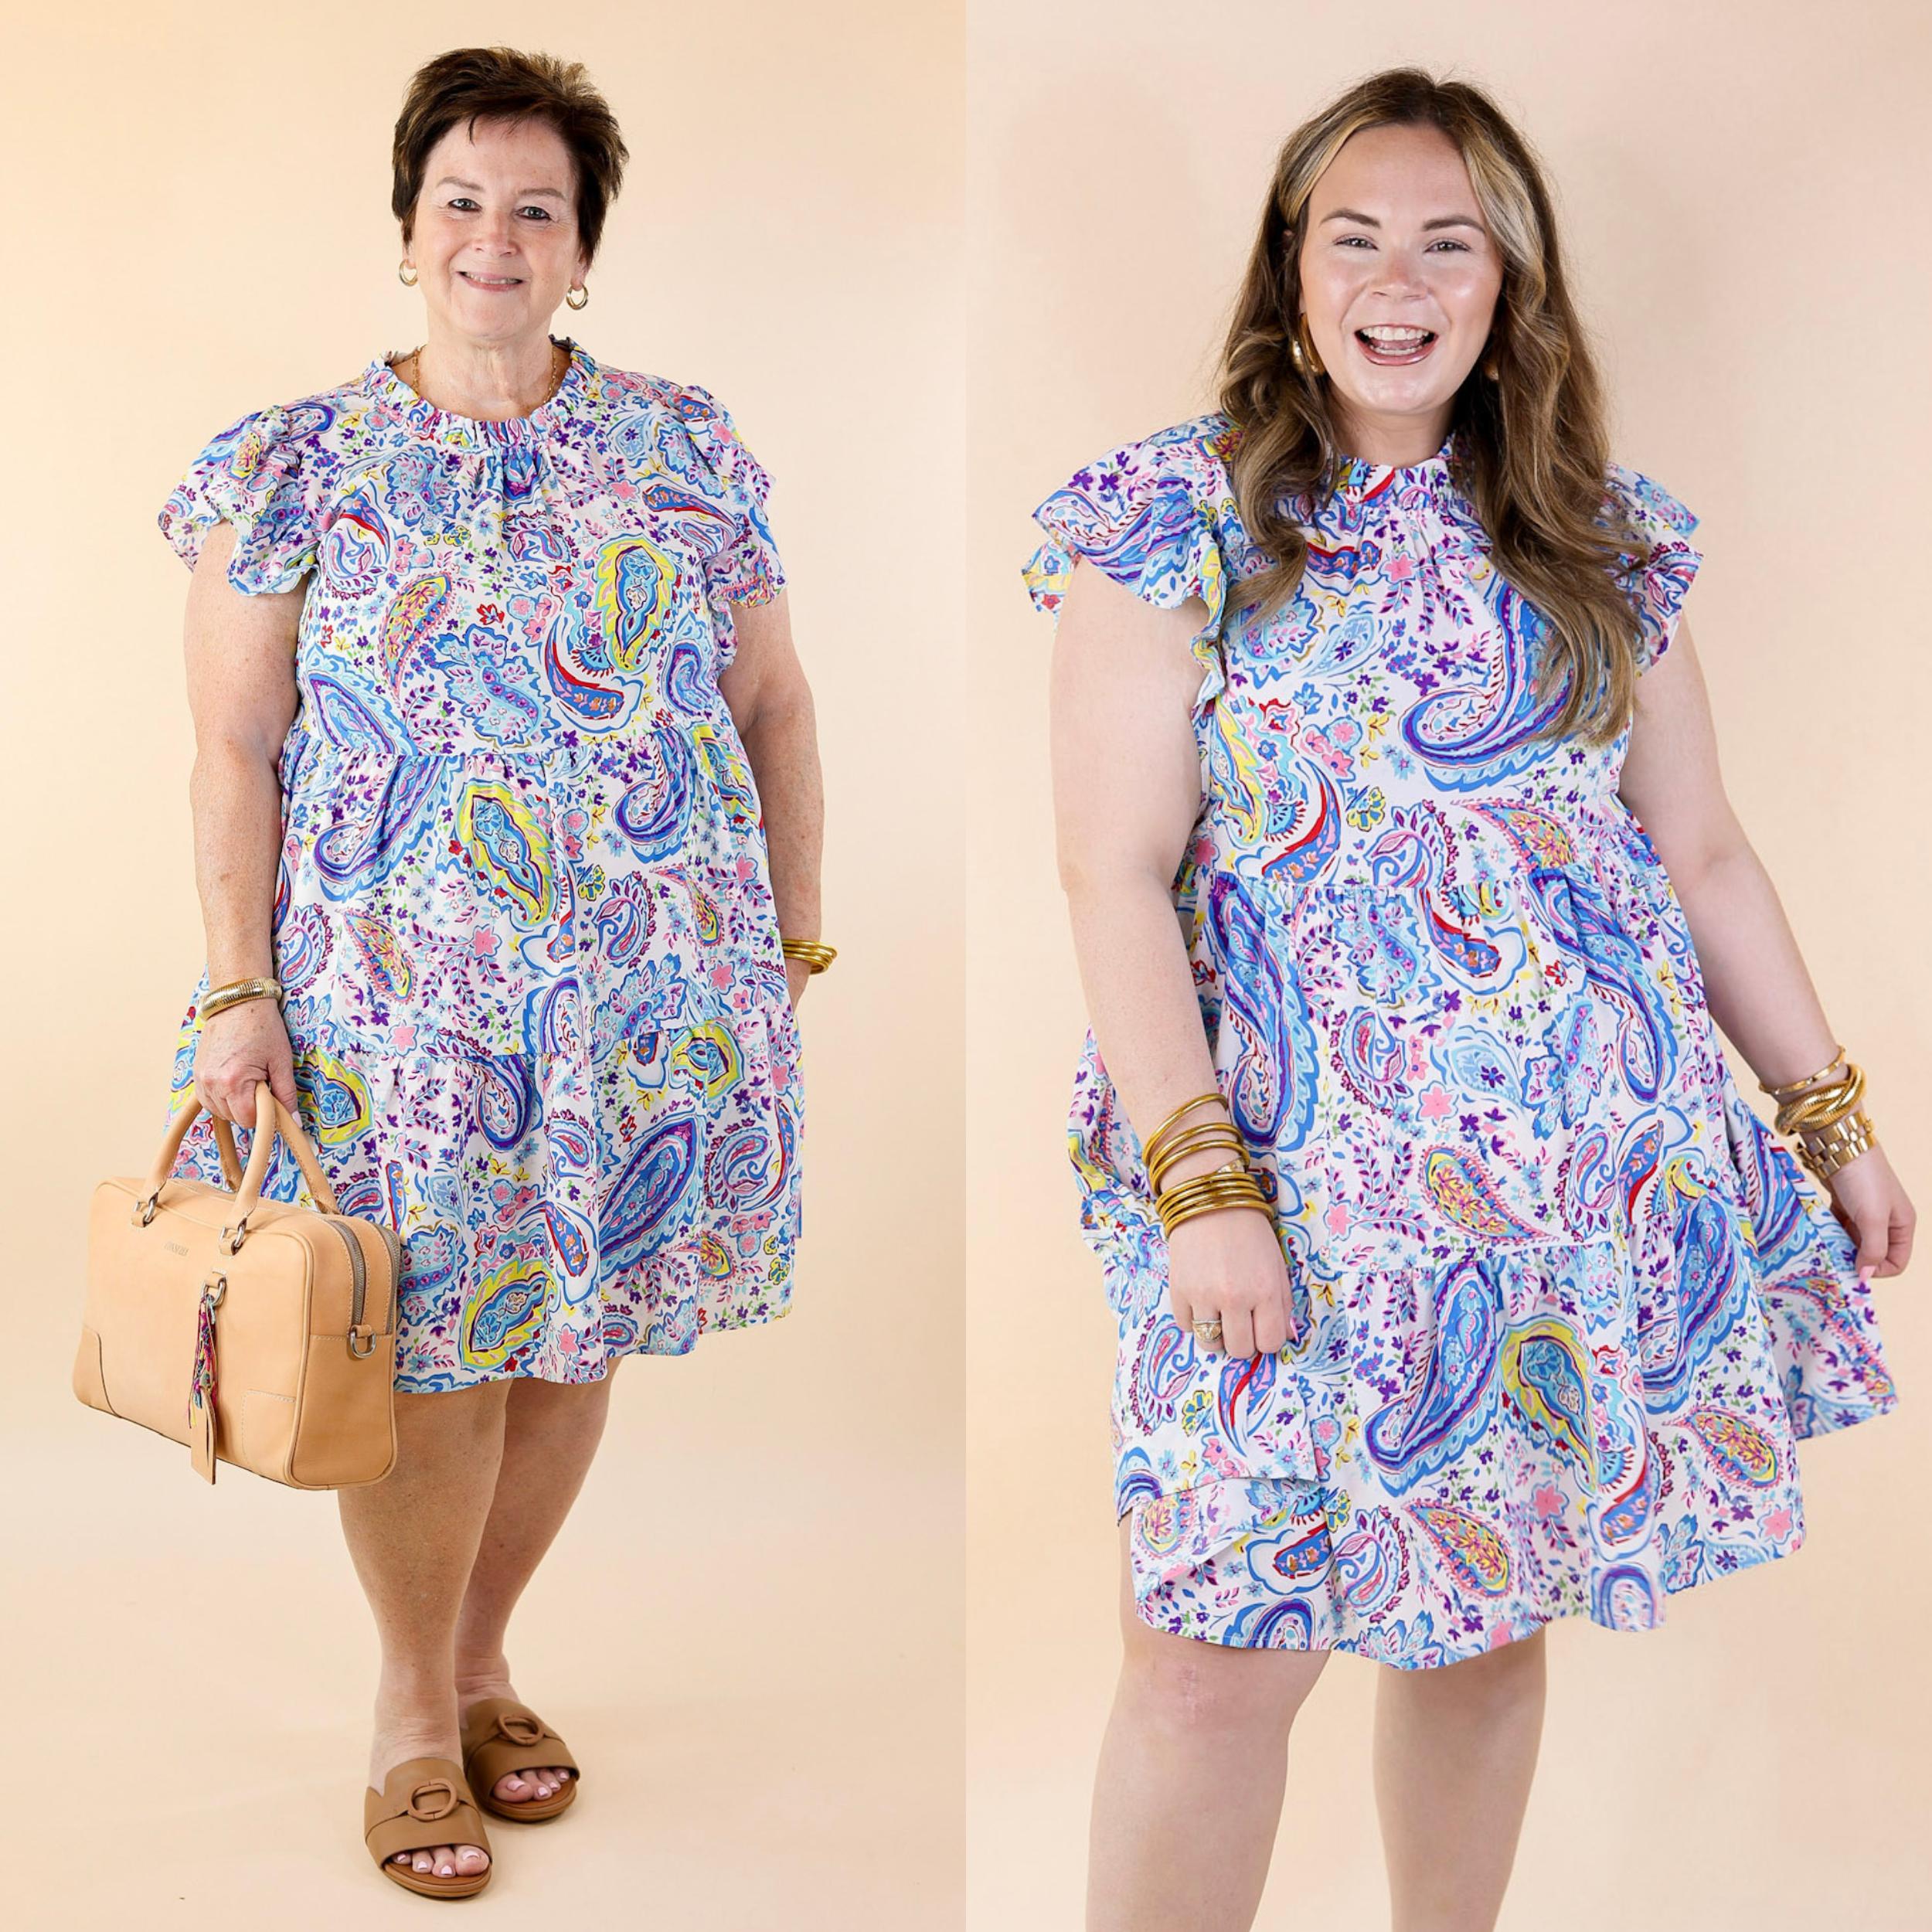 Like a Dream Paisley and Floral Print Dress in Blue Mix - Giddy Up Glamour Boutique